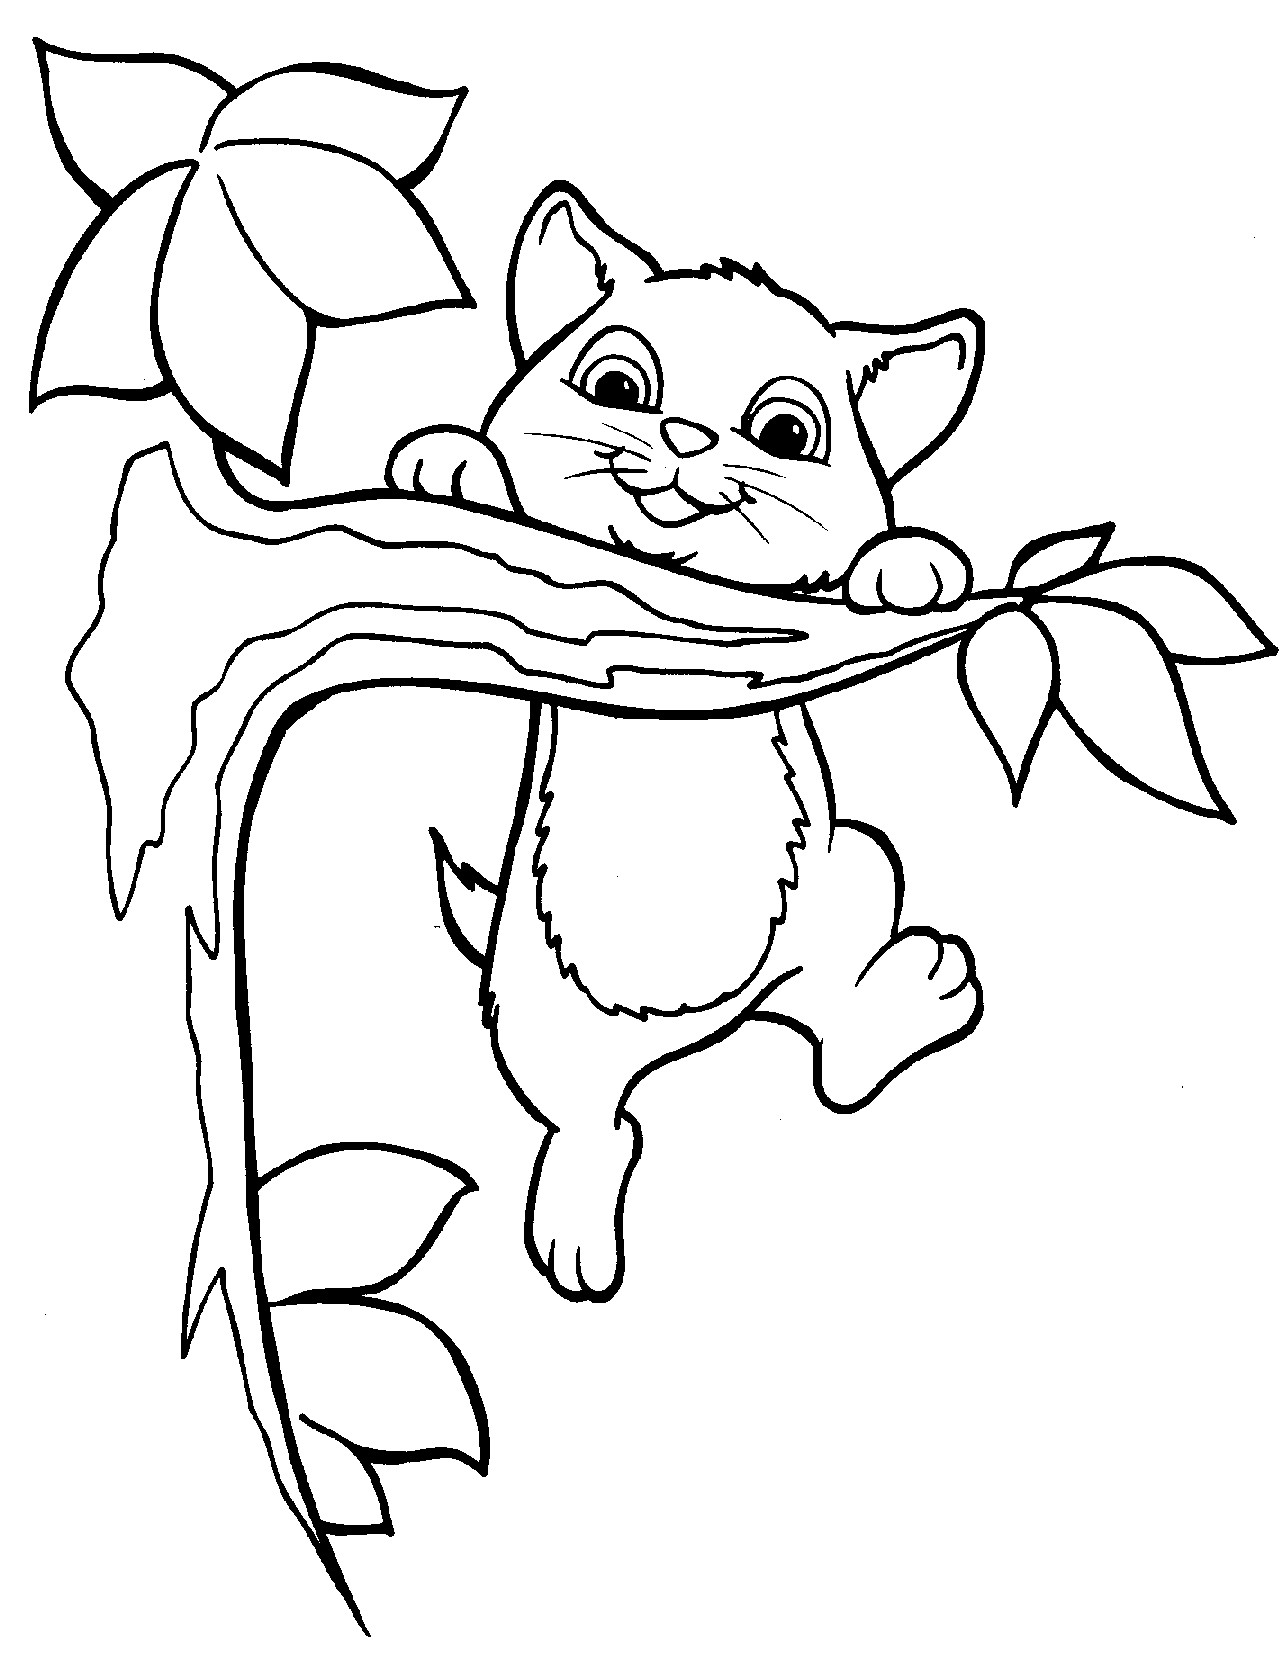 Kitten Coloring Pages For Kids
 Free Printable Kitten Coloring Pages For Kids Best